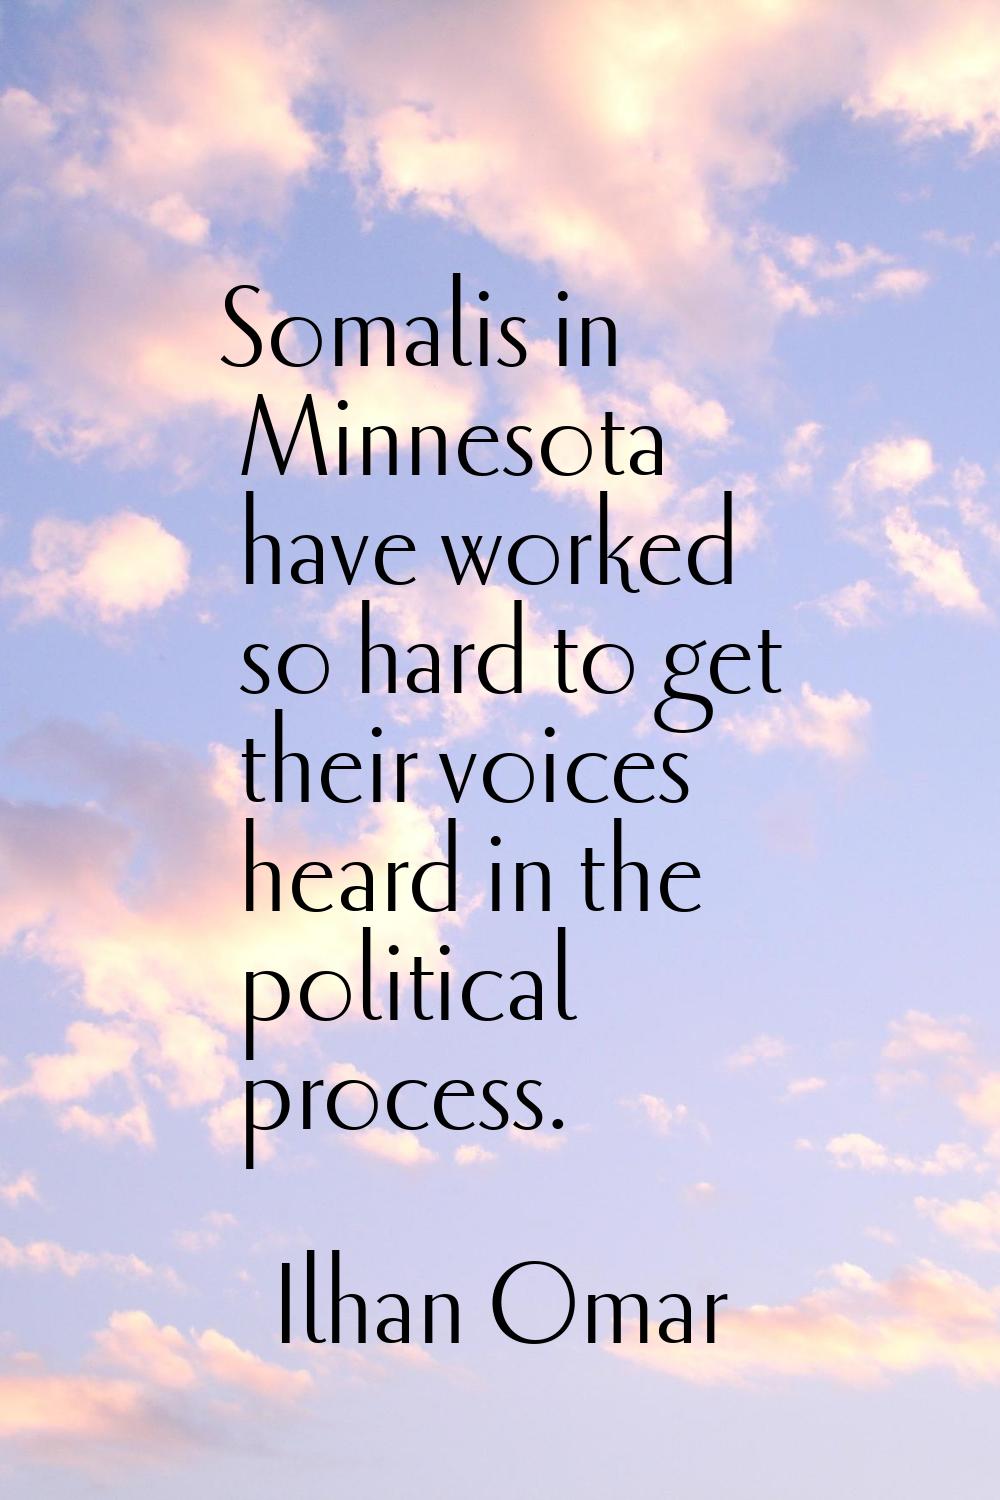 Somalis in Minnesota have worked so hard to get their voices heard in the political process.